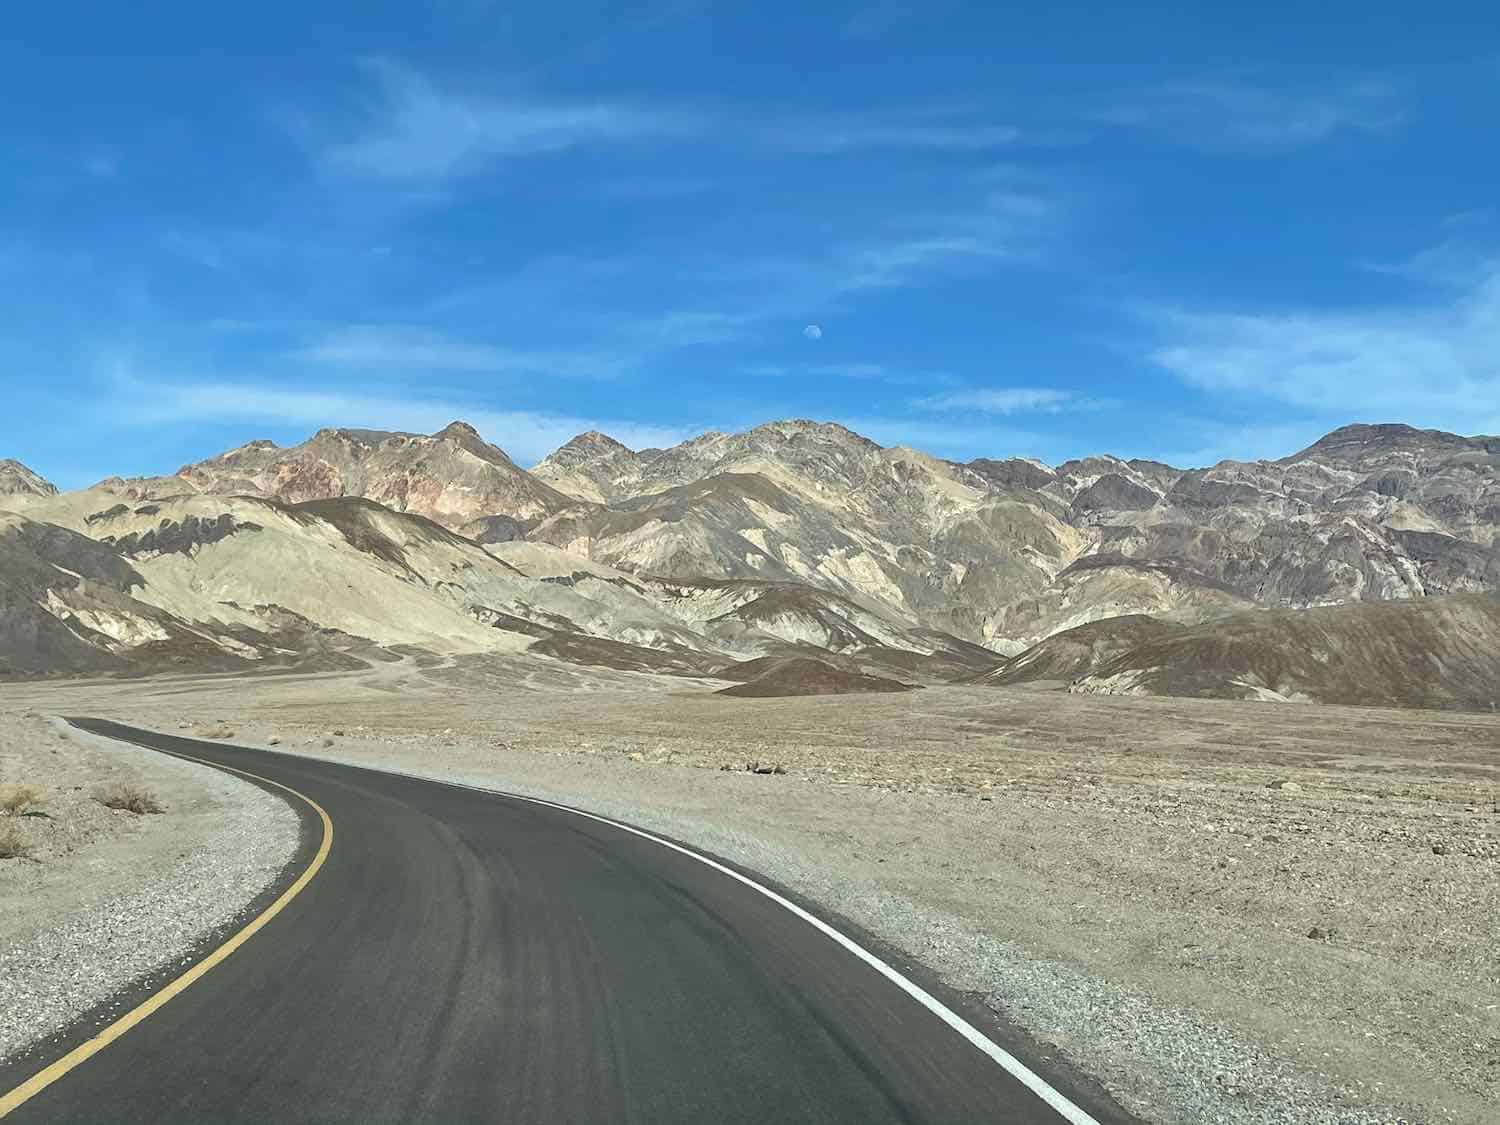 Paved road leading into the white and beige colored mountains of Death Valley National Park.